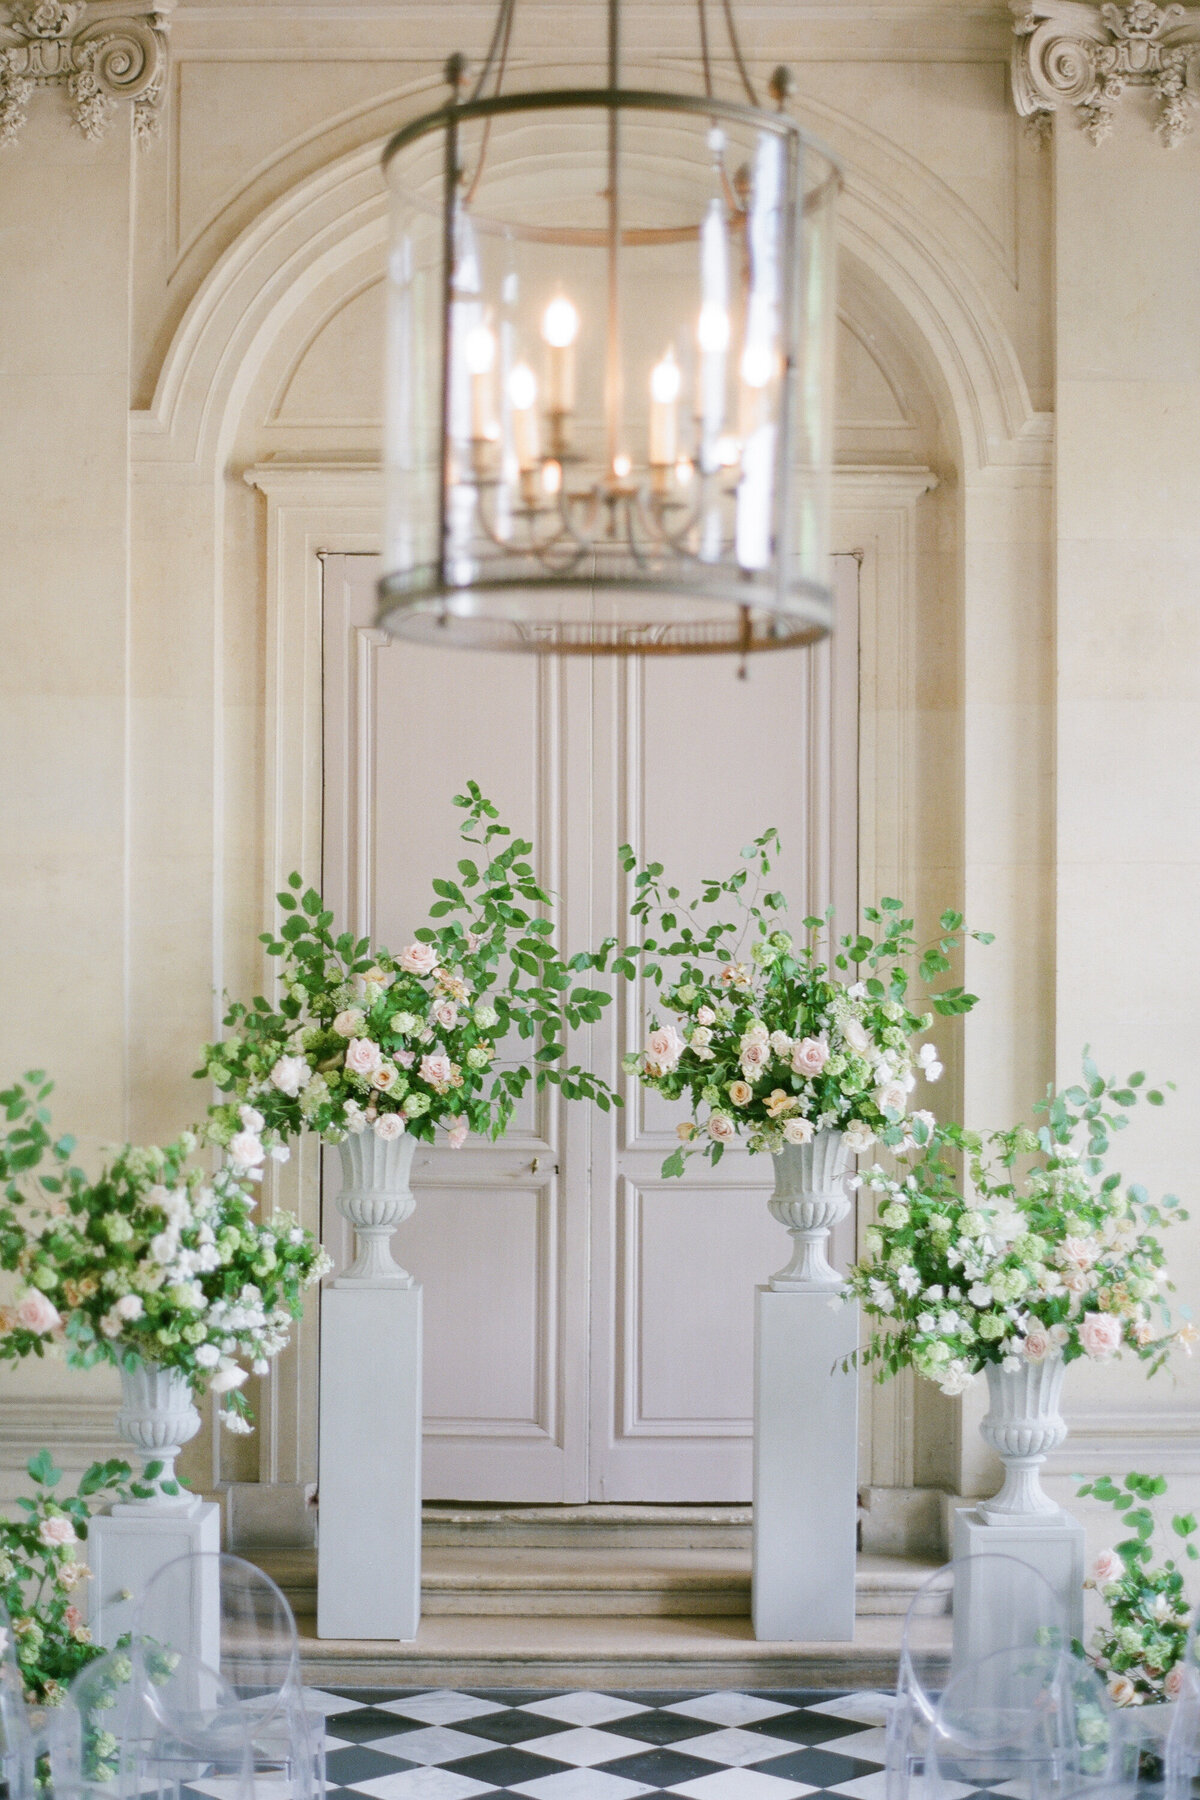 Jennifer Fox Weddings English speaking wedding planning & design agency in France crafting refined and bespoke weddings and celebrations Provence, Paris and destination Laurel-Chris-Chateau-de-Champlatreaux-Molly-Carr-Photography-58